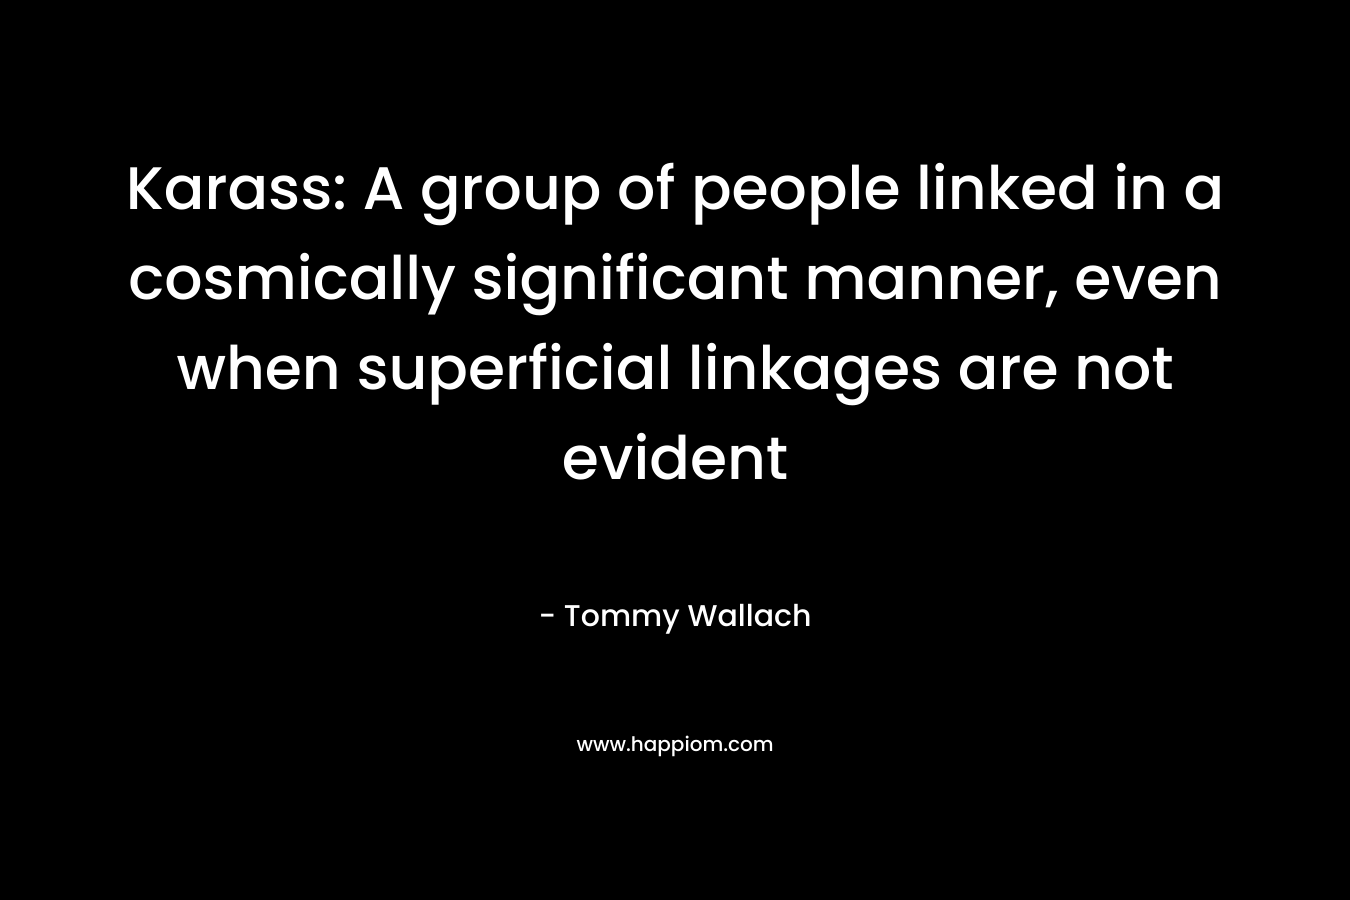 Karass: A group of people linked in a cosmically significant manner, even when superficial linkages are not evident – Tommy Wallach